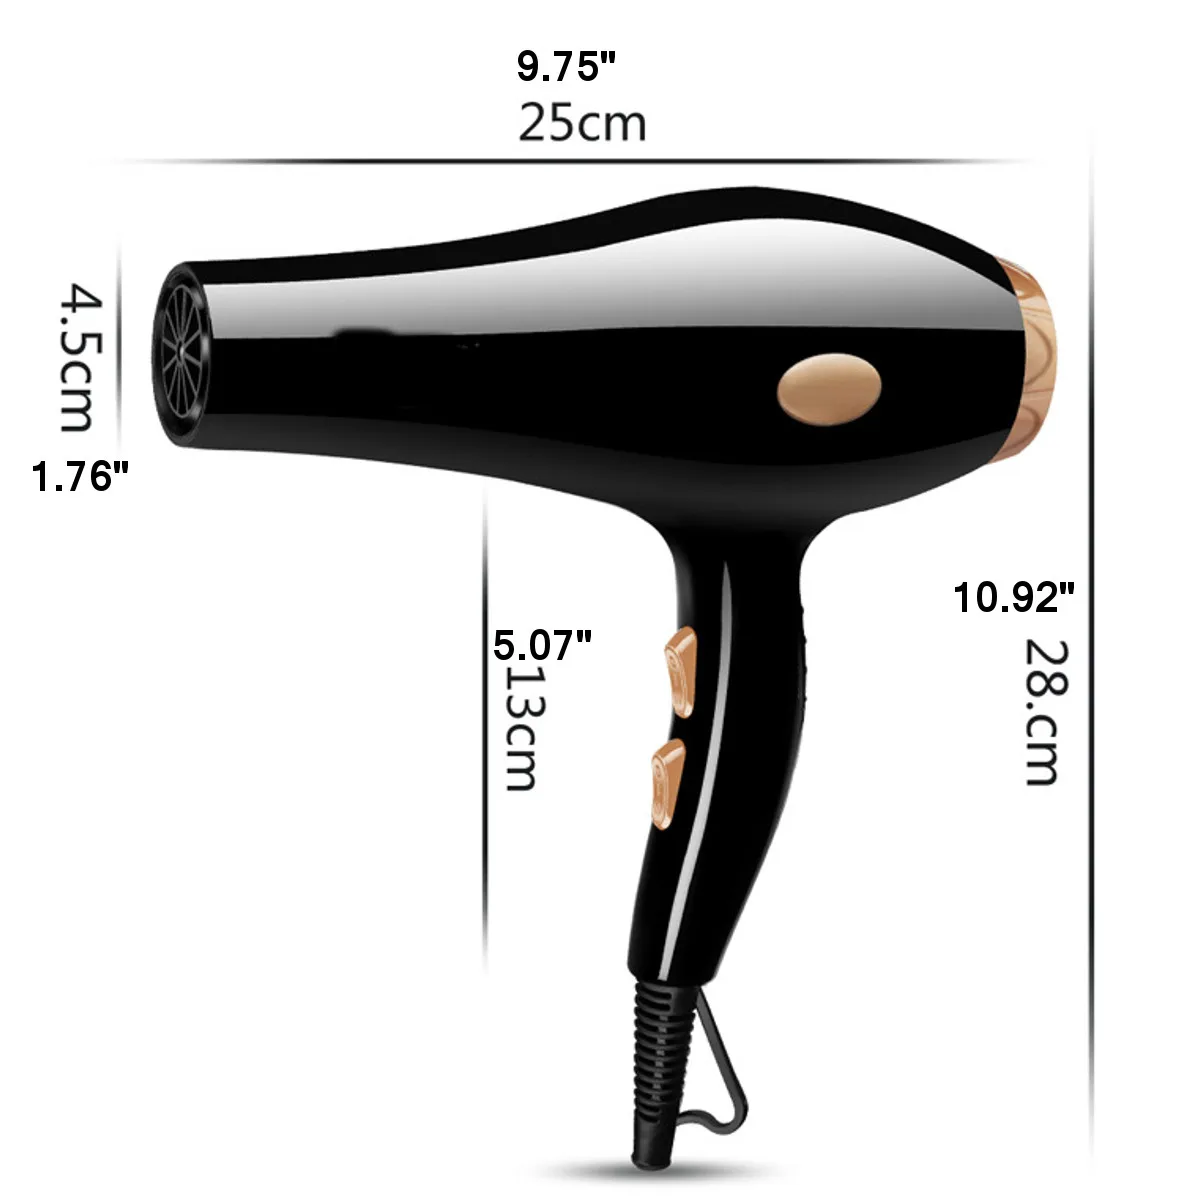 

220V Professional 2200W Blue-ray Hair Dryer Strong Power Barber Salon Styling Tools Hot/Cold Air Blow Dryer 2 Speed Adjustment